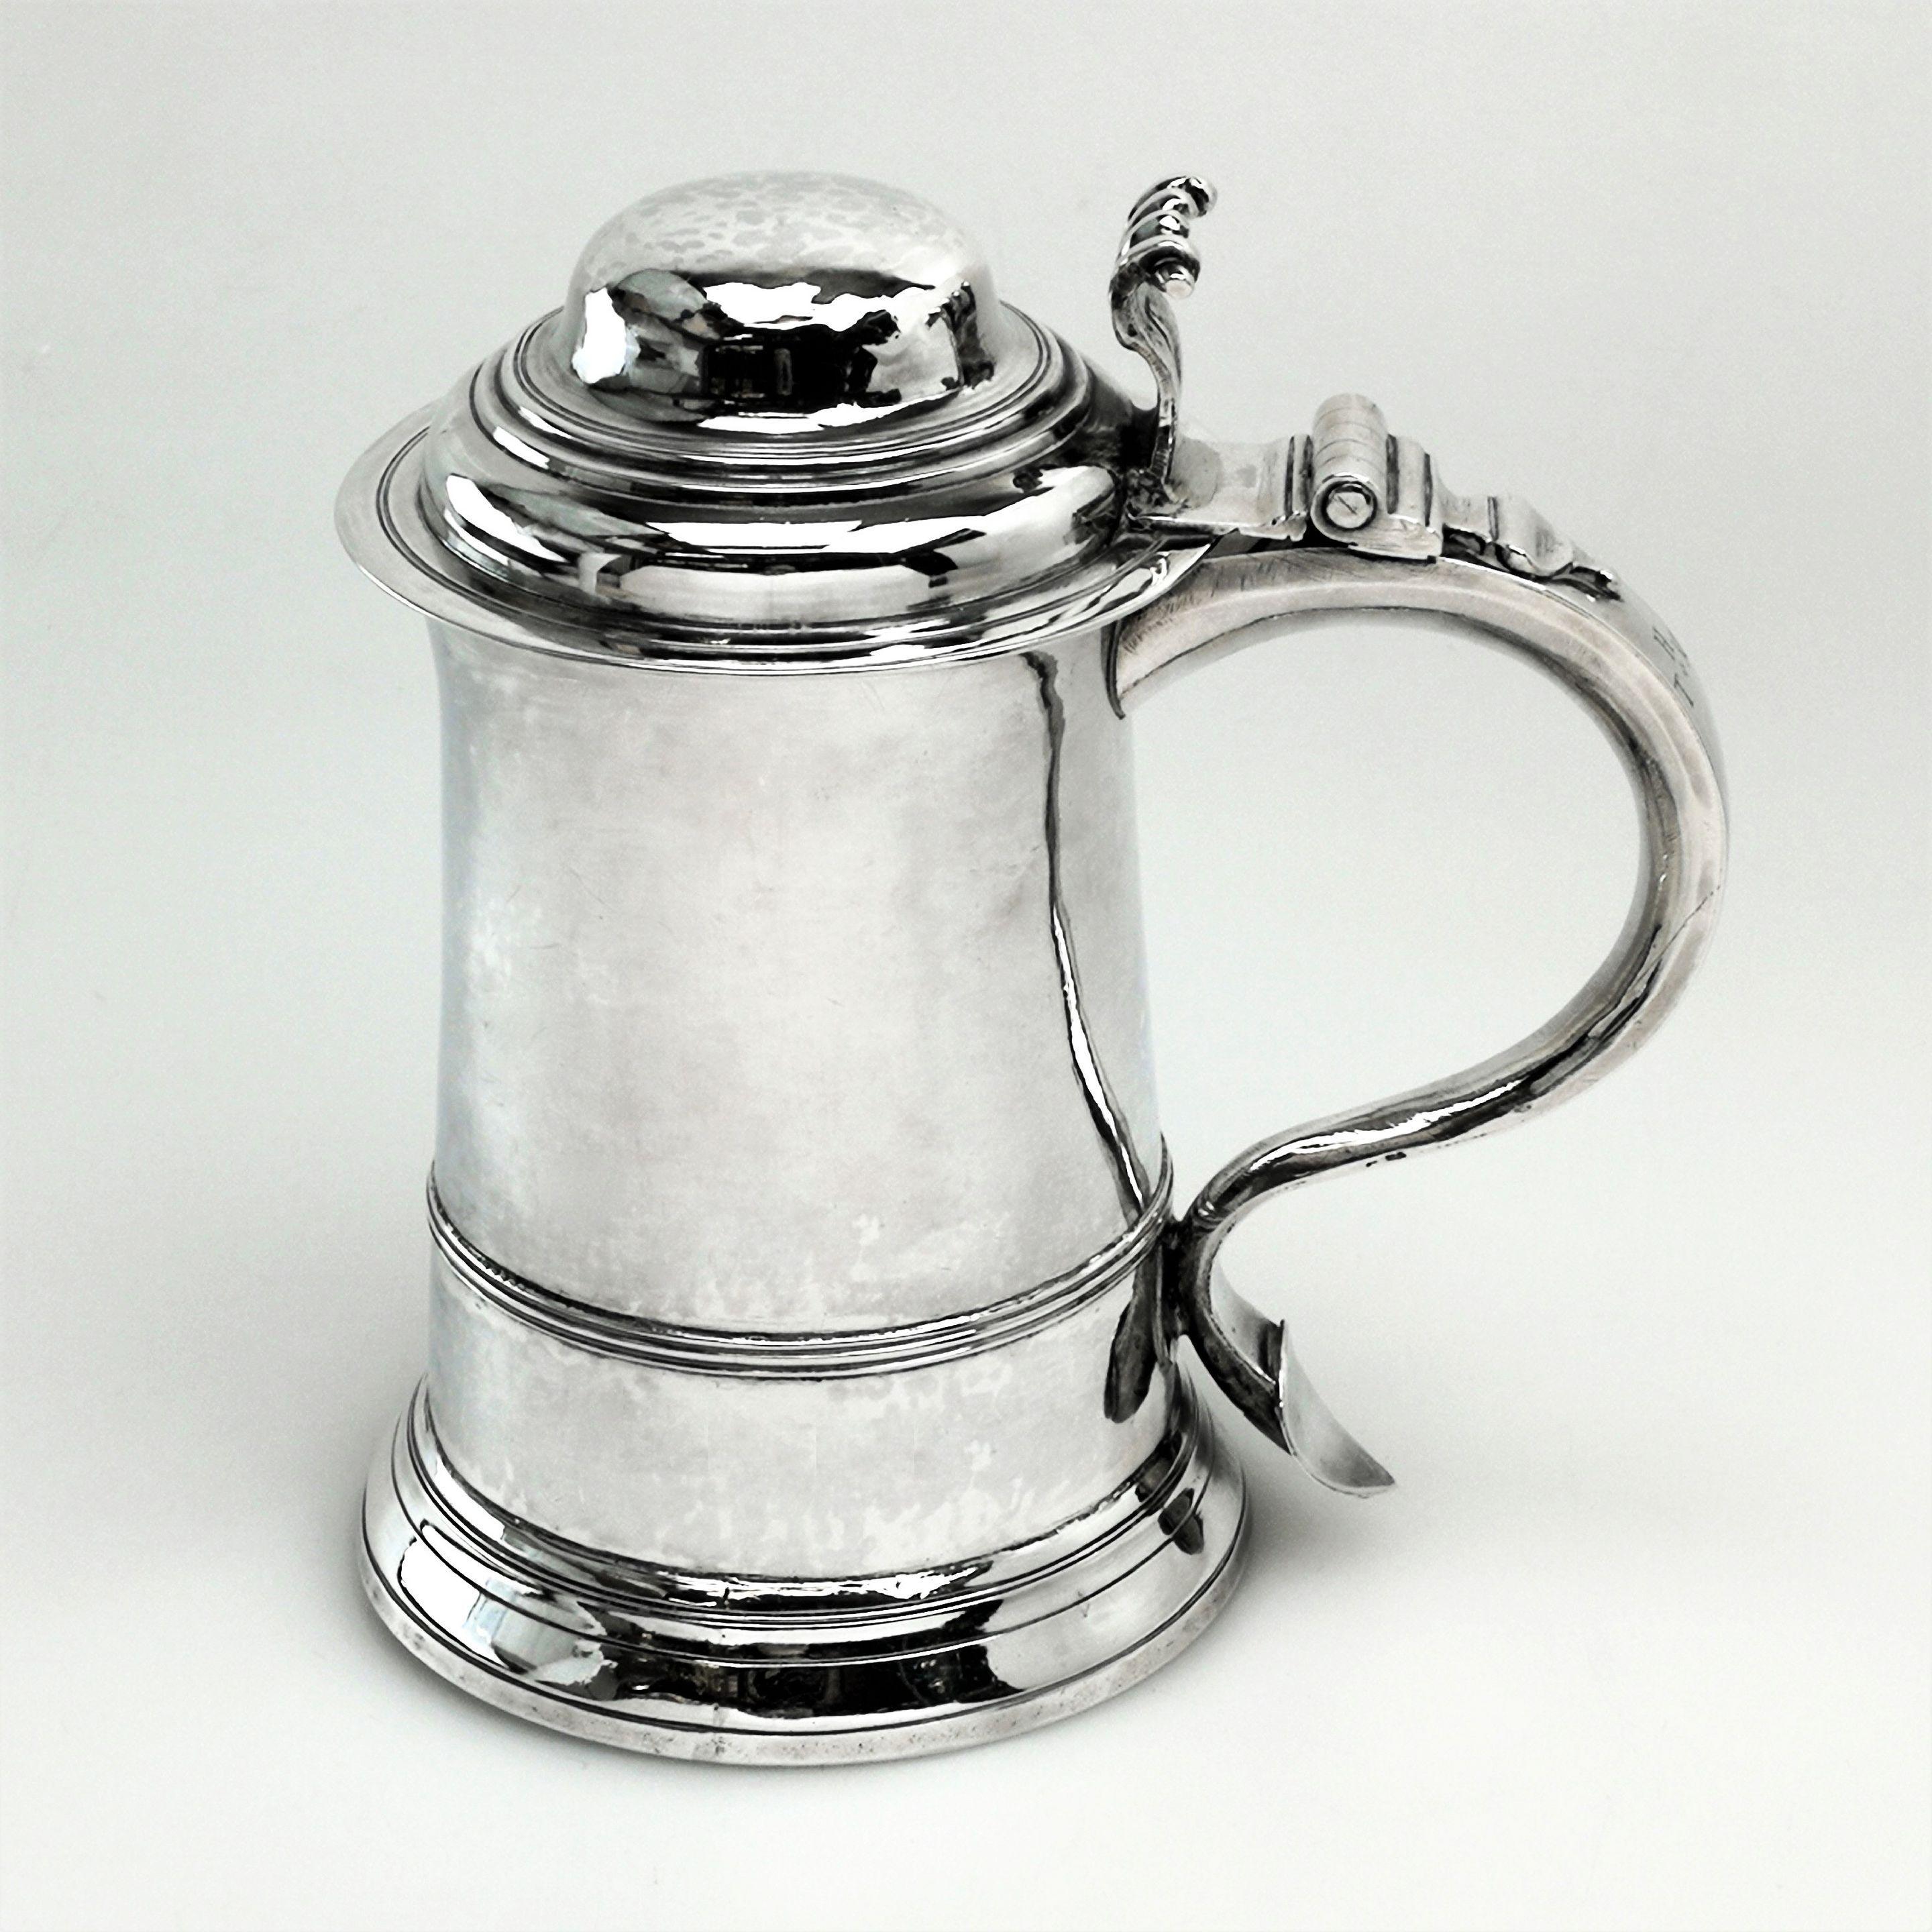 A Classic antique George II Georgian solid silver Tankard in a traditional straight sided design tapering towards a substantial domed lid. The Tankard has a large scroll handle and a scroll shaped thumb piece. There are three initials engraved on